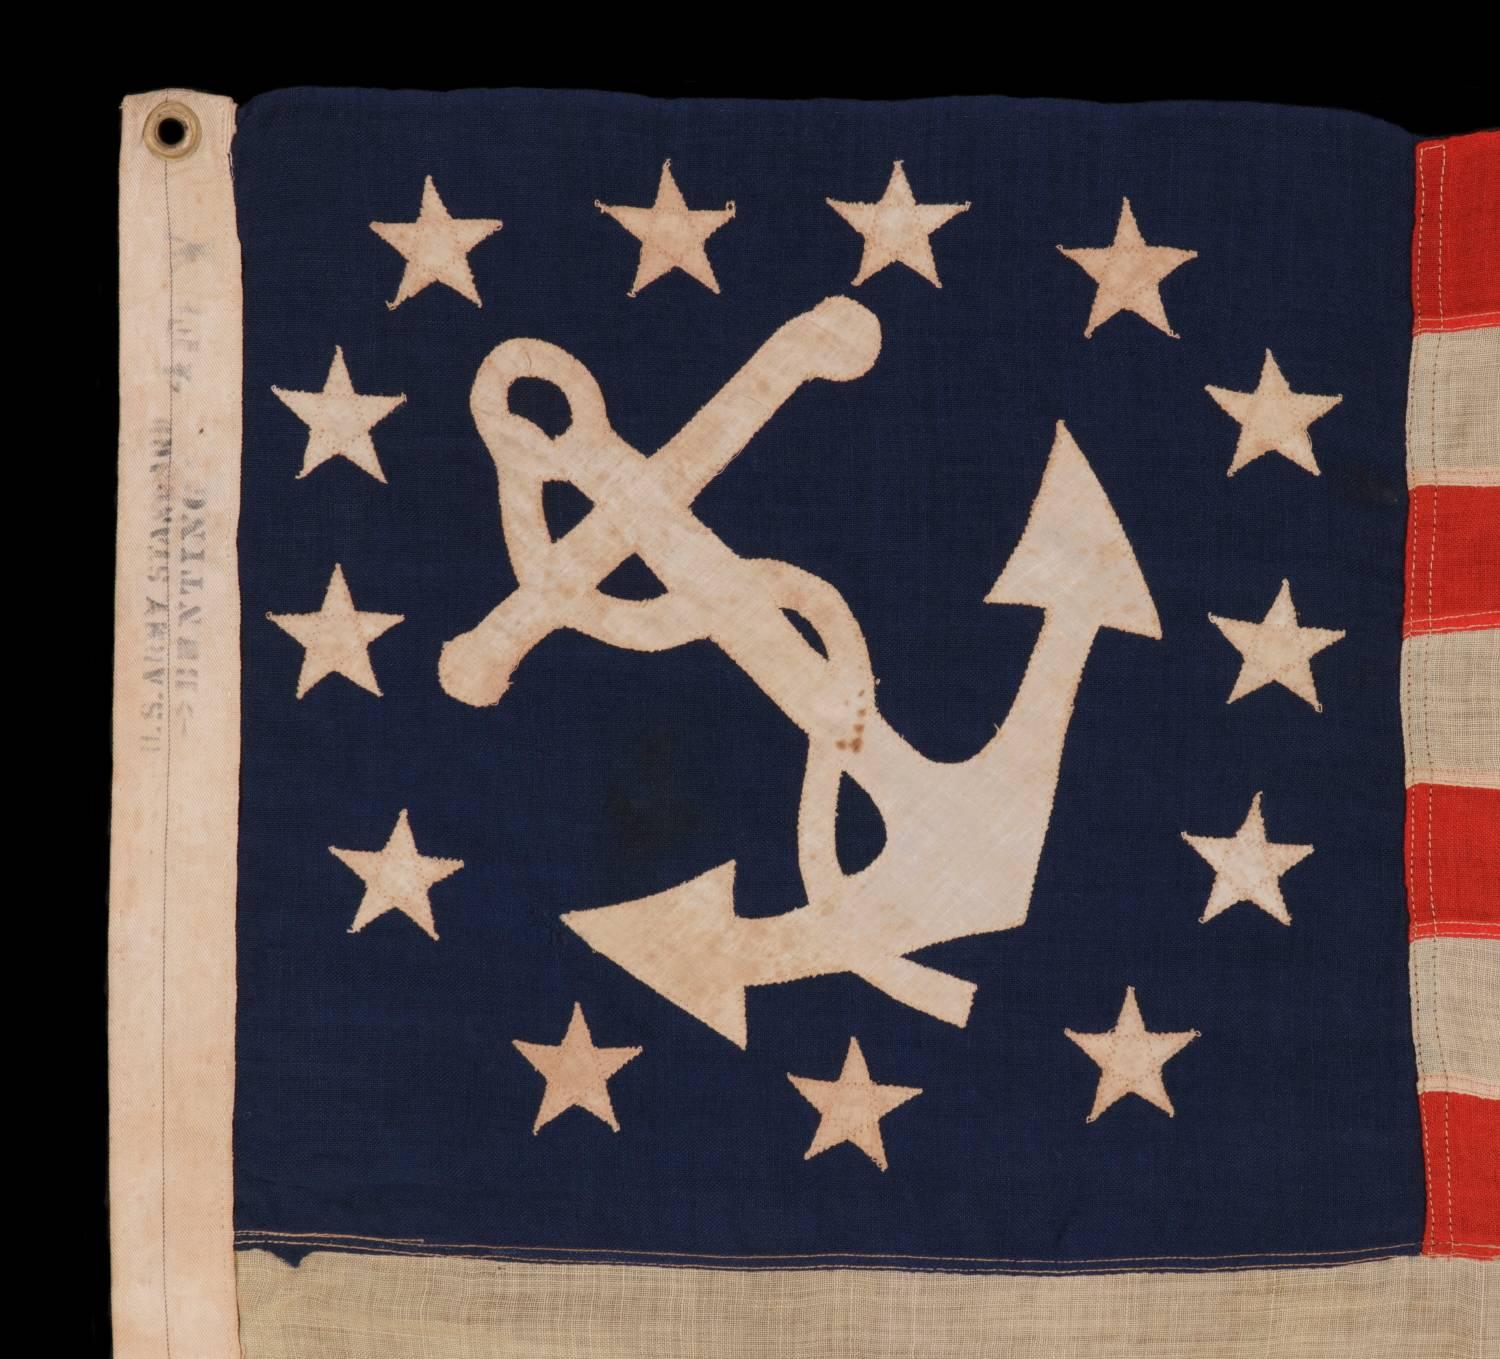 Antique American Private Yacht Flag with 13 Stars Marked 